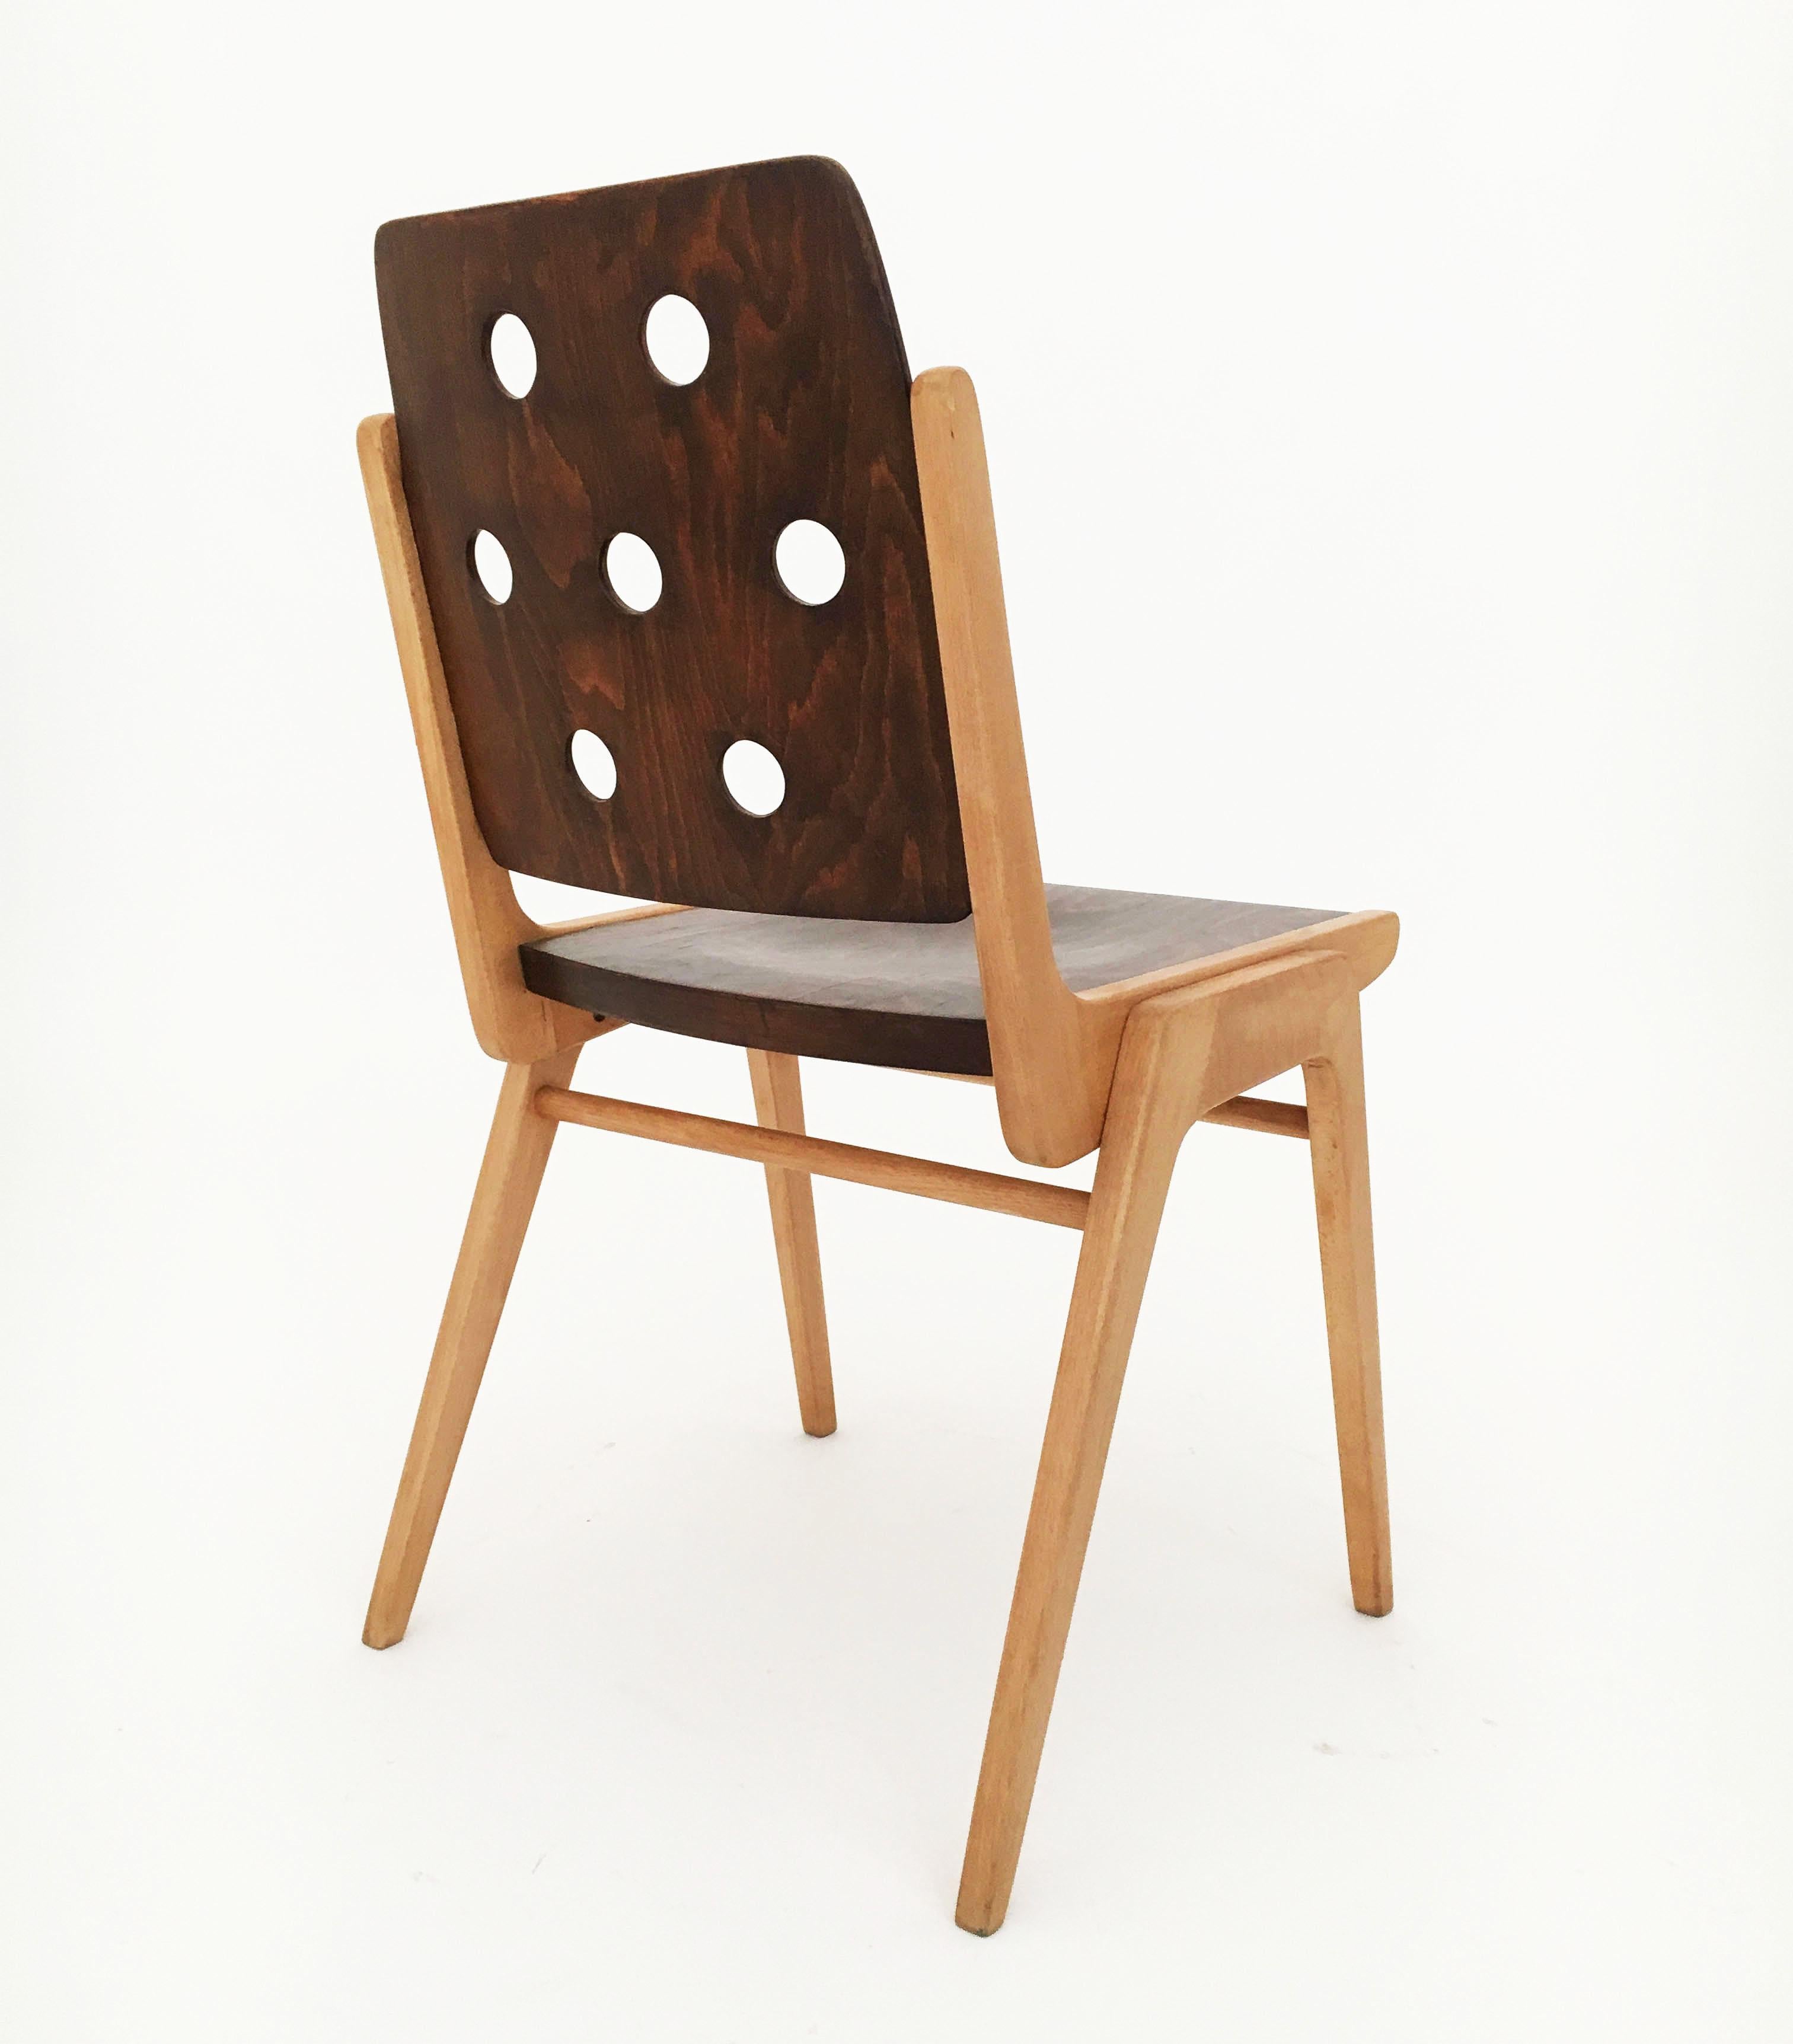 Up to 15 Franz Schuster 'Maestro' Stacking Dining Chairs, Austria, 1950s 2